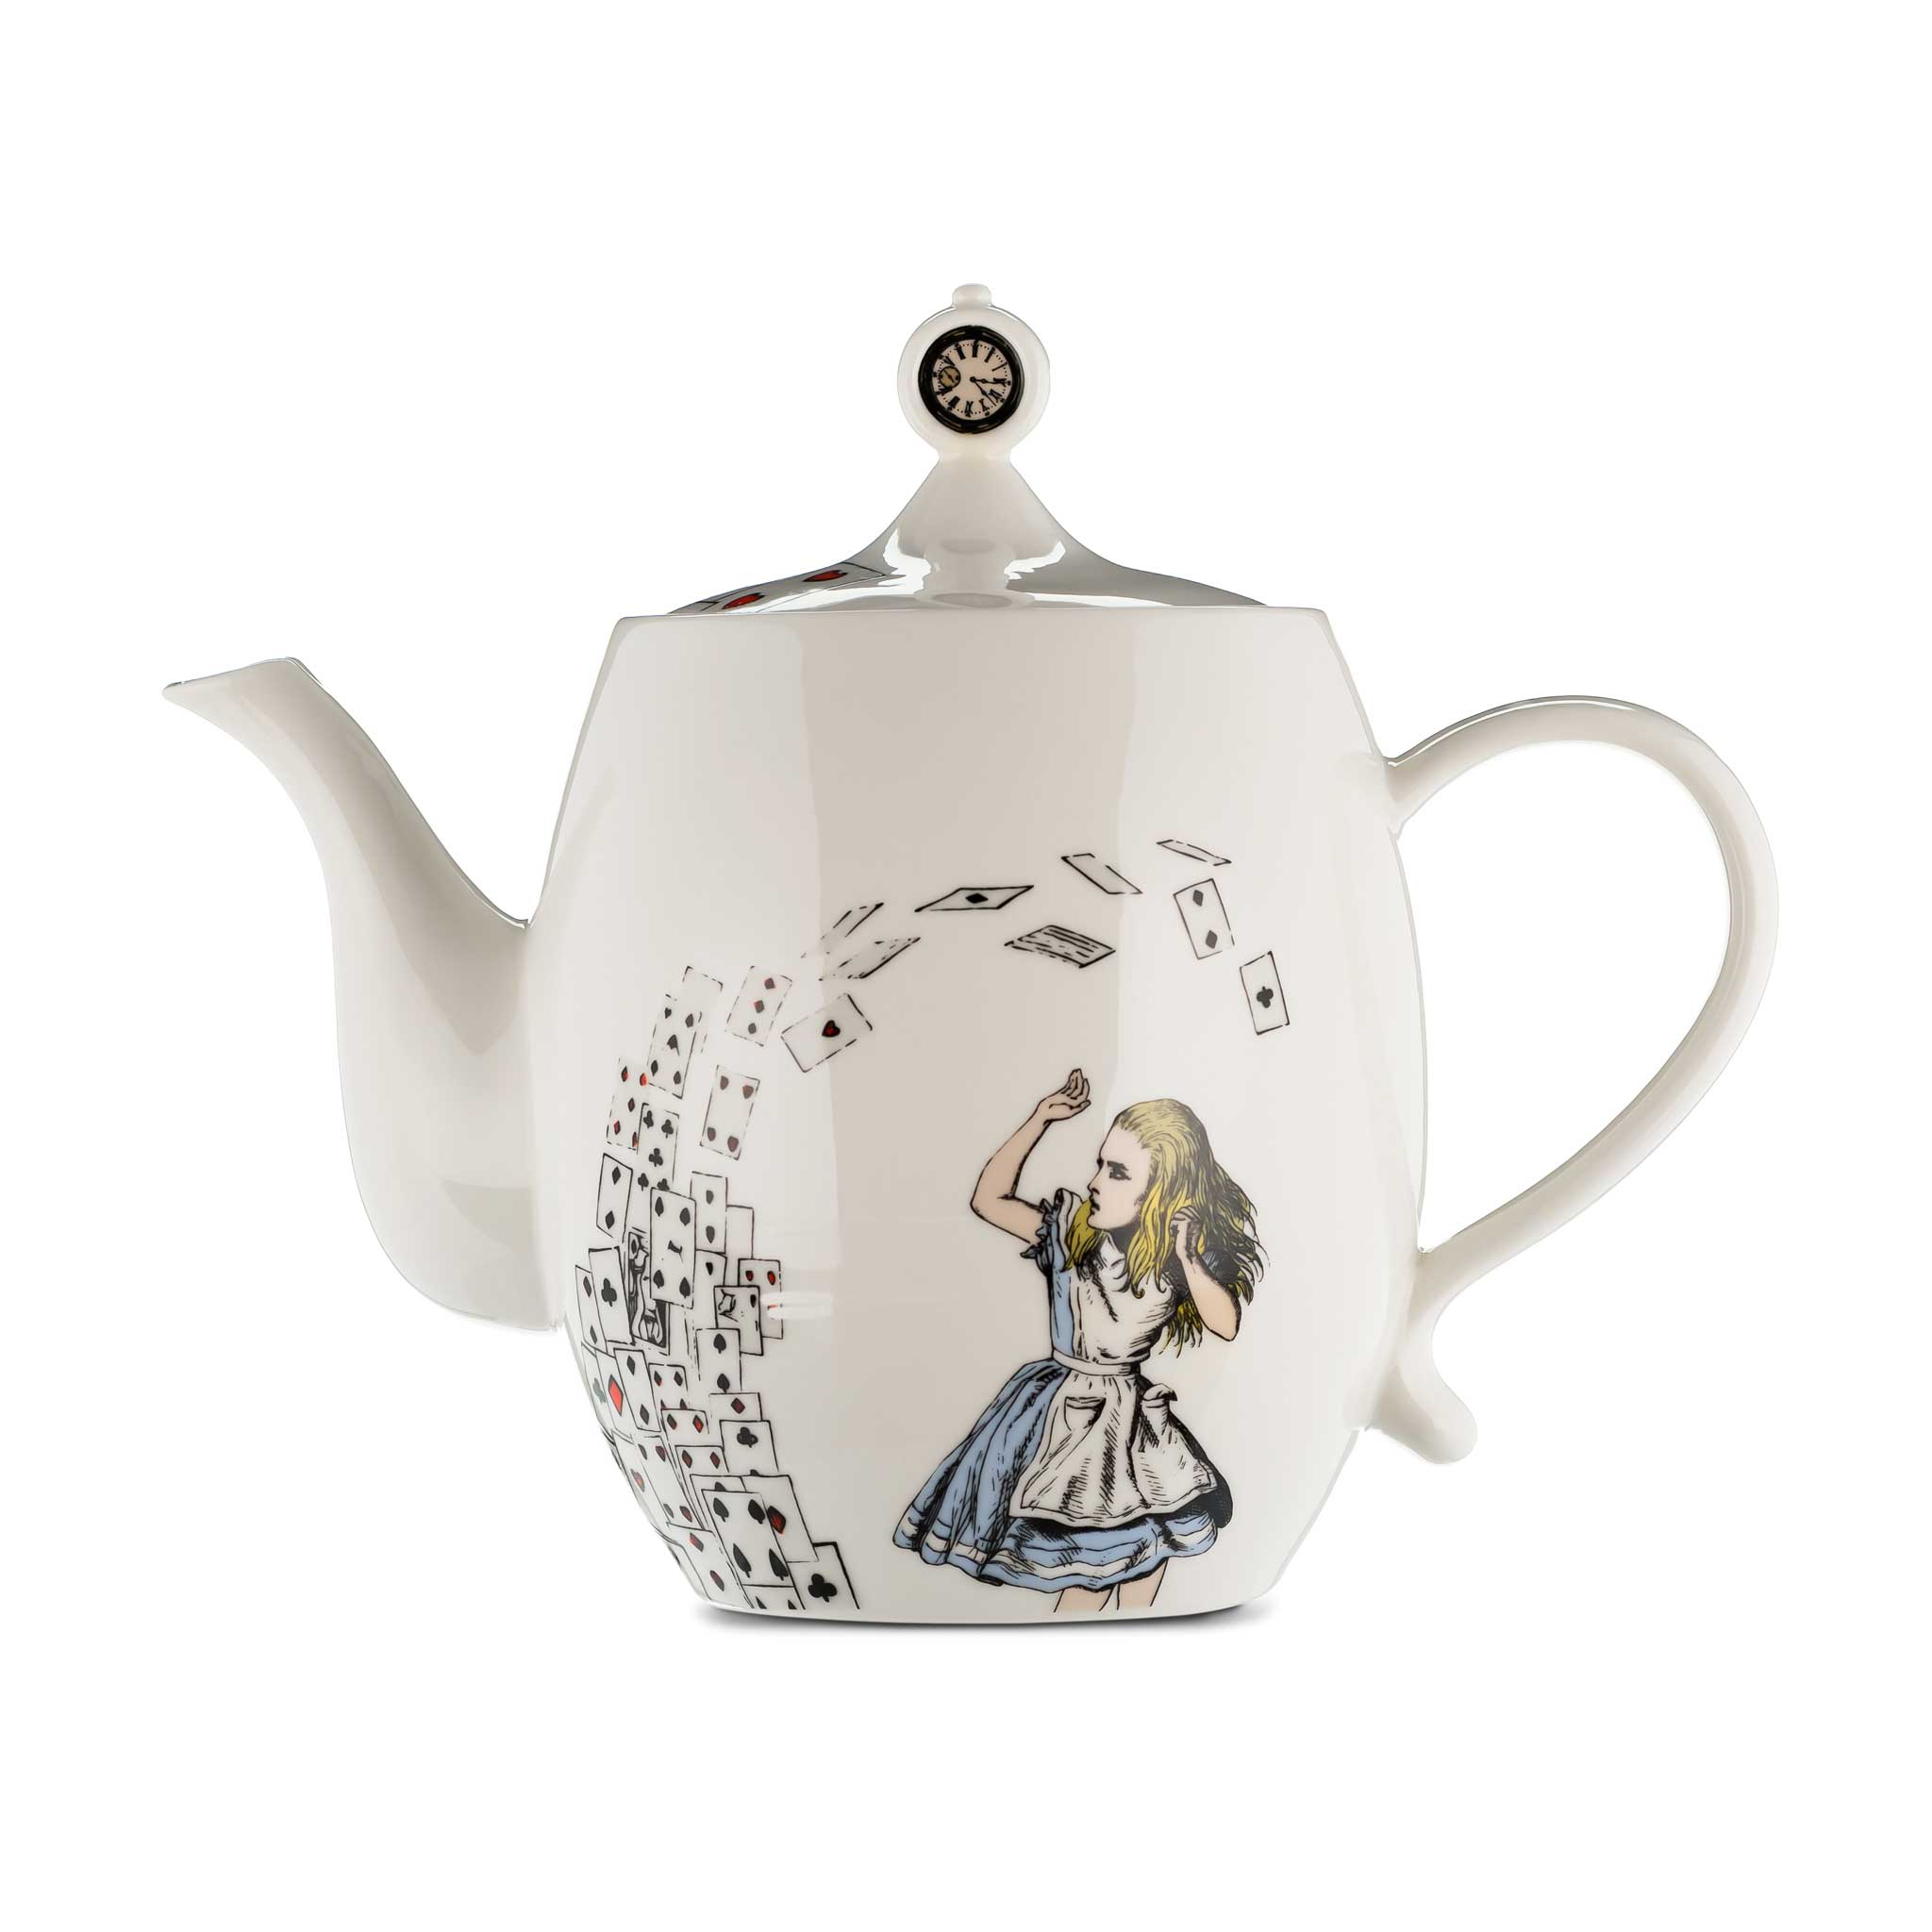 Alice in Wonderland teapot from China Blue